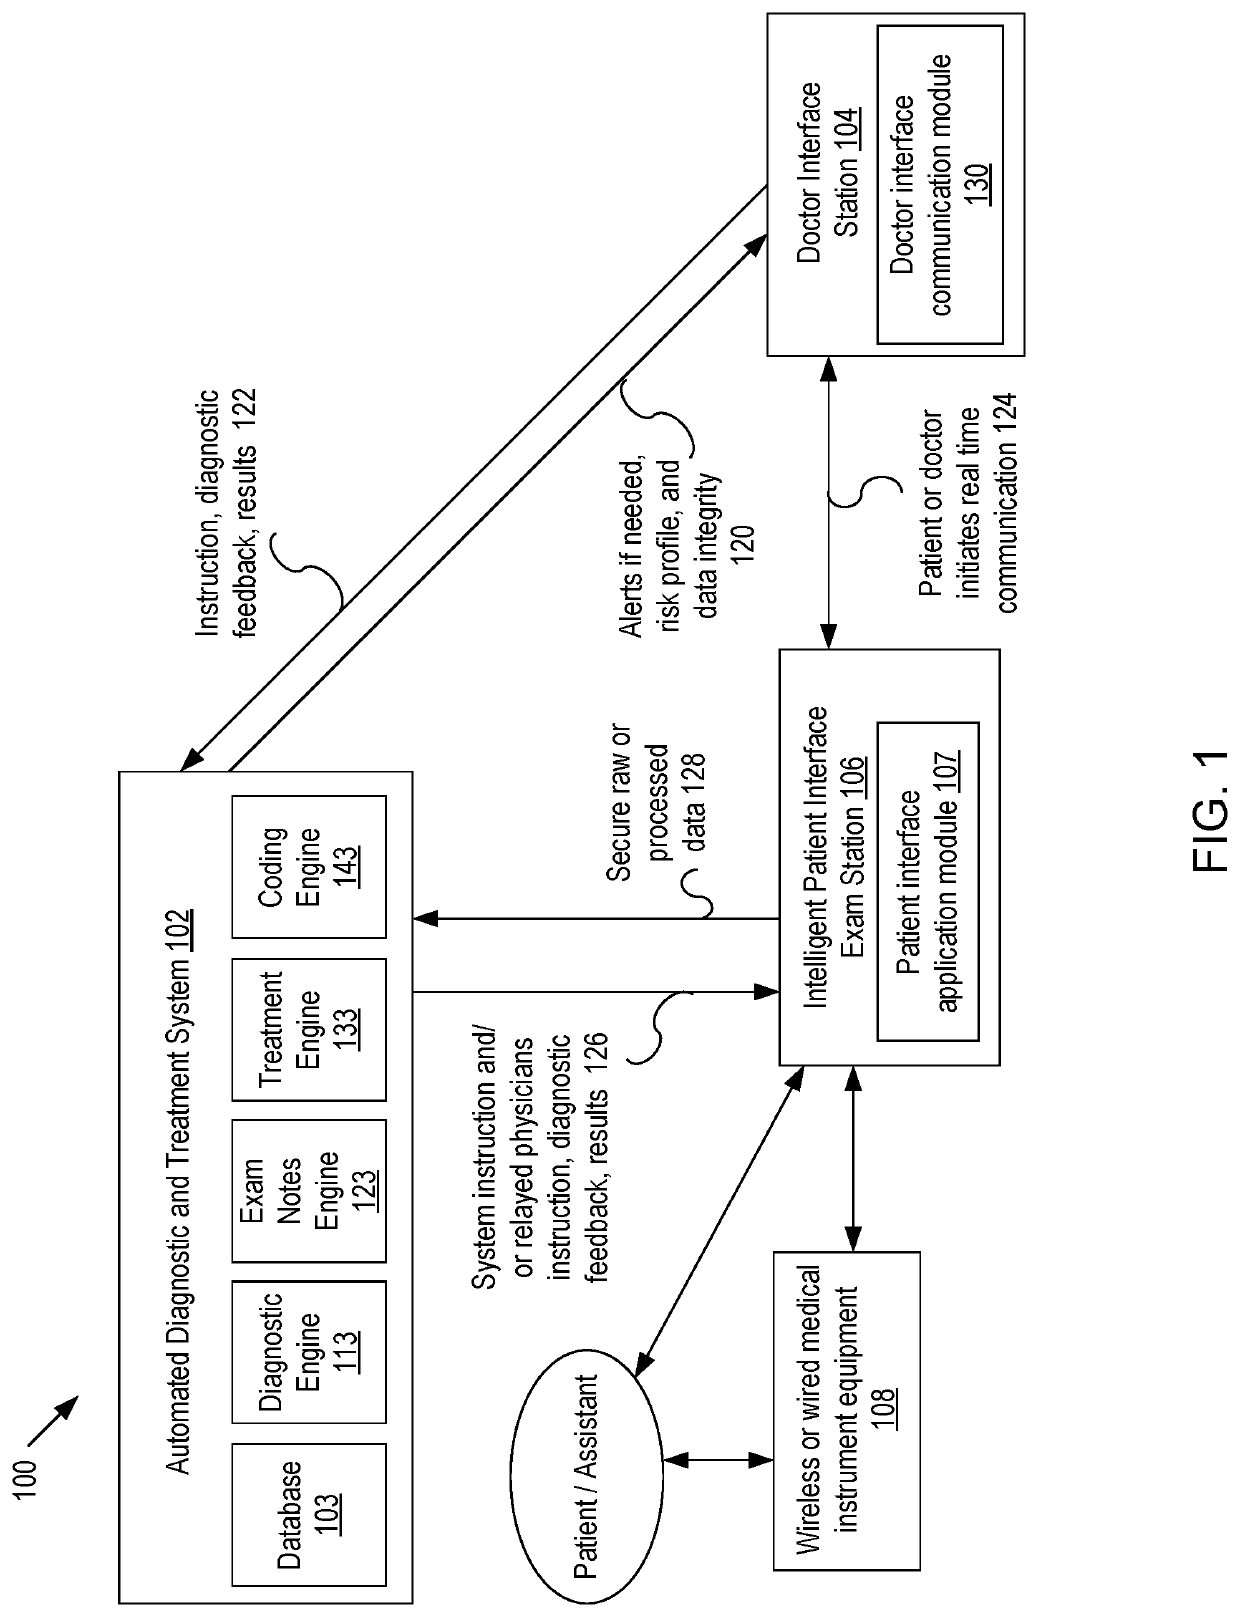 Systems and methods for intelligent patient interface exam station